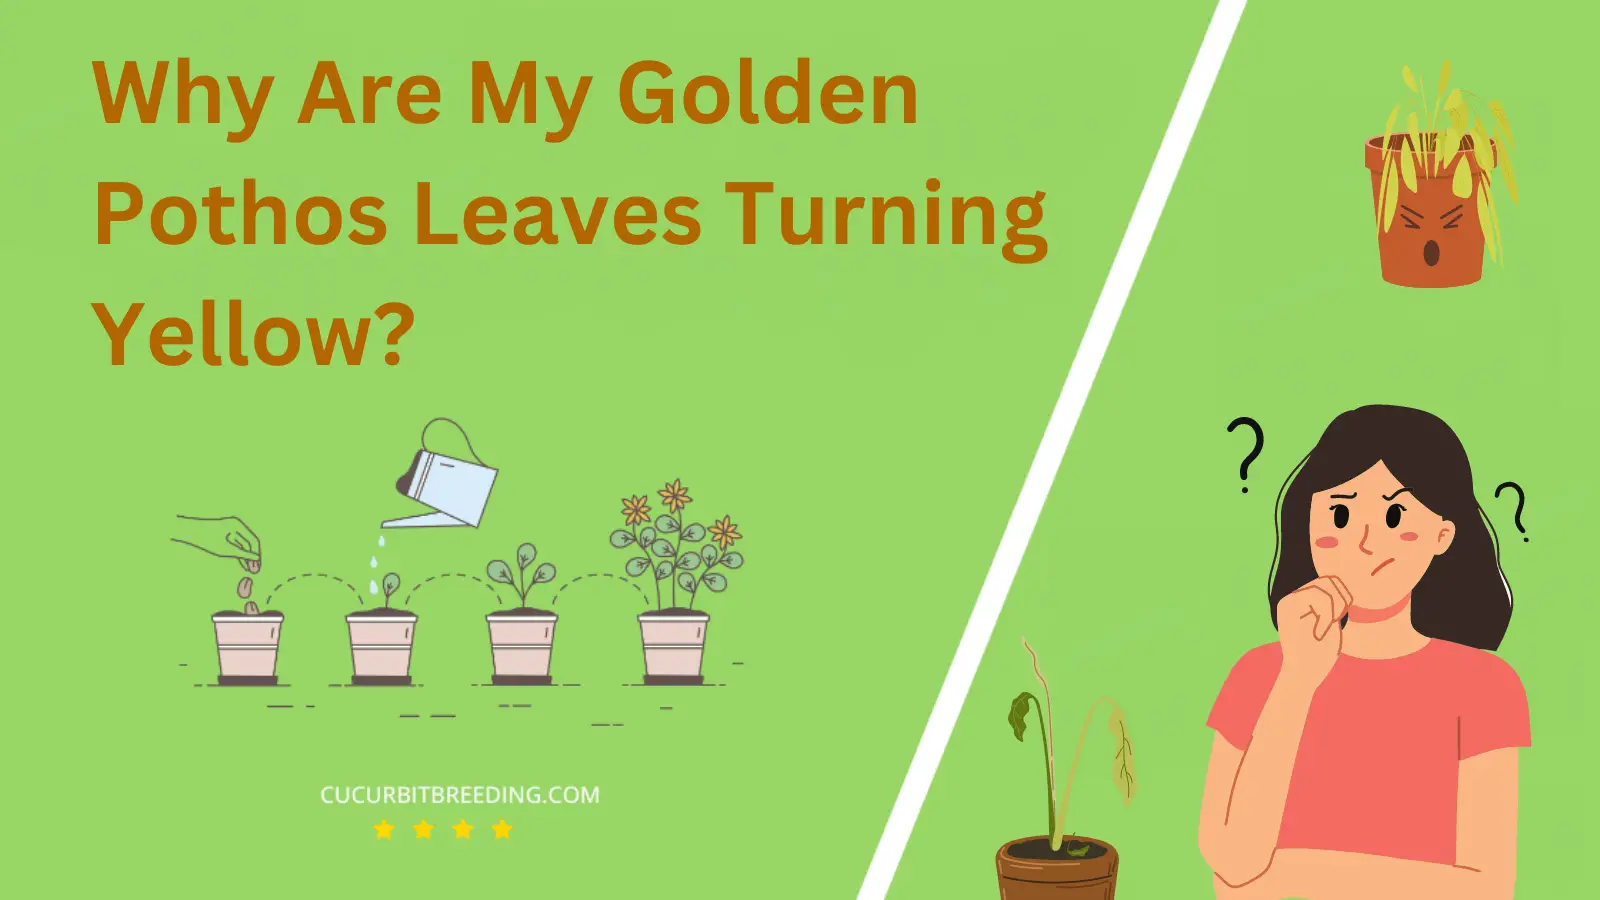 Why Are My Golden Pothos Leaves Turning Yellow